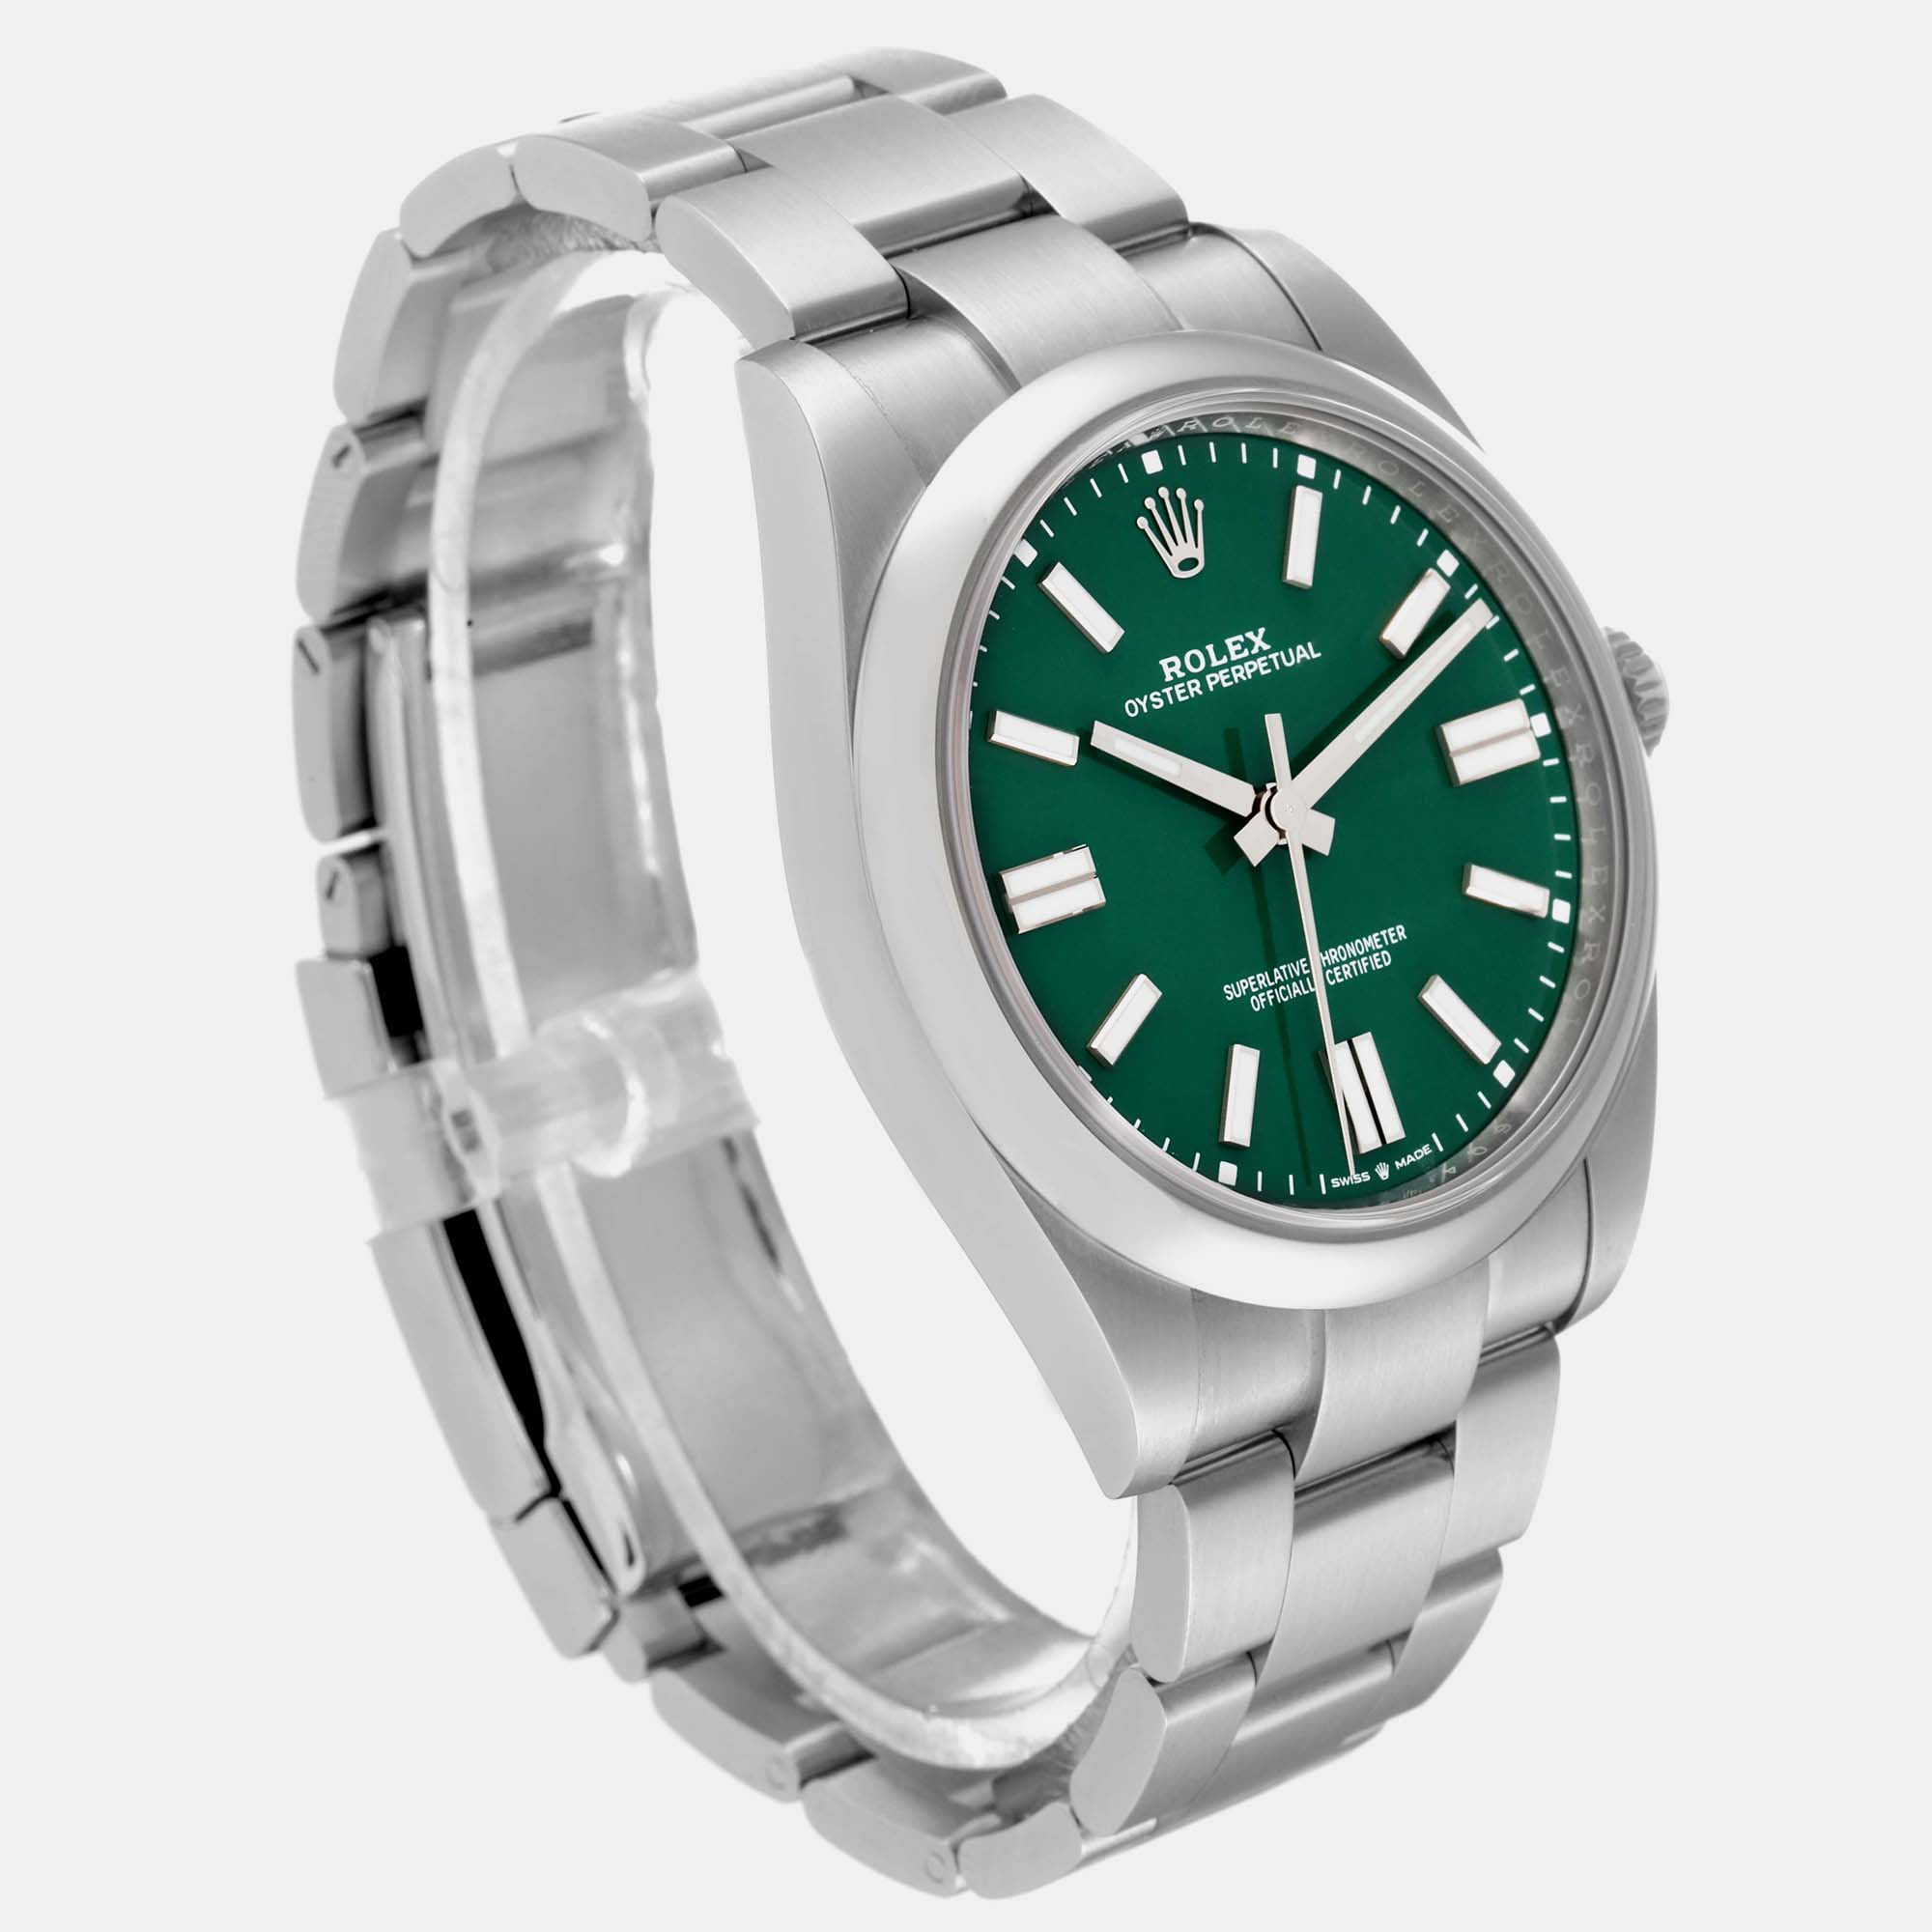 Rolex Oyster Perpetual 41mm Green Dial Steel Mens Watch 124300